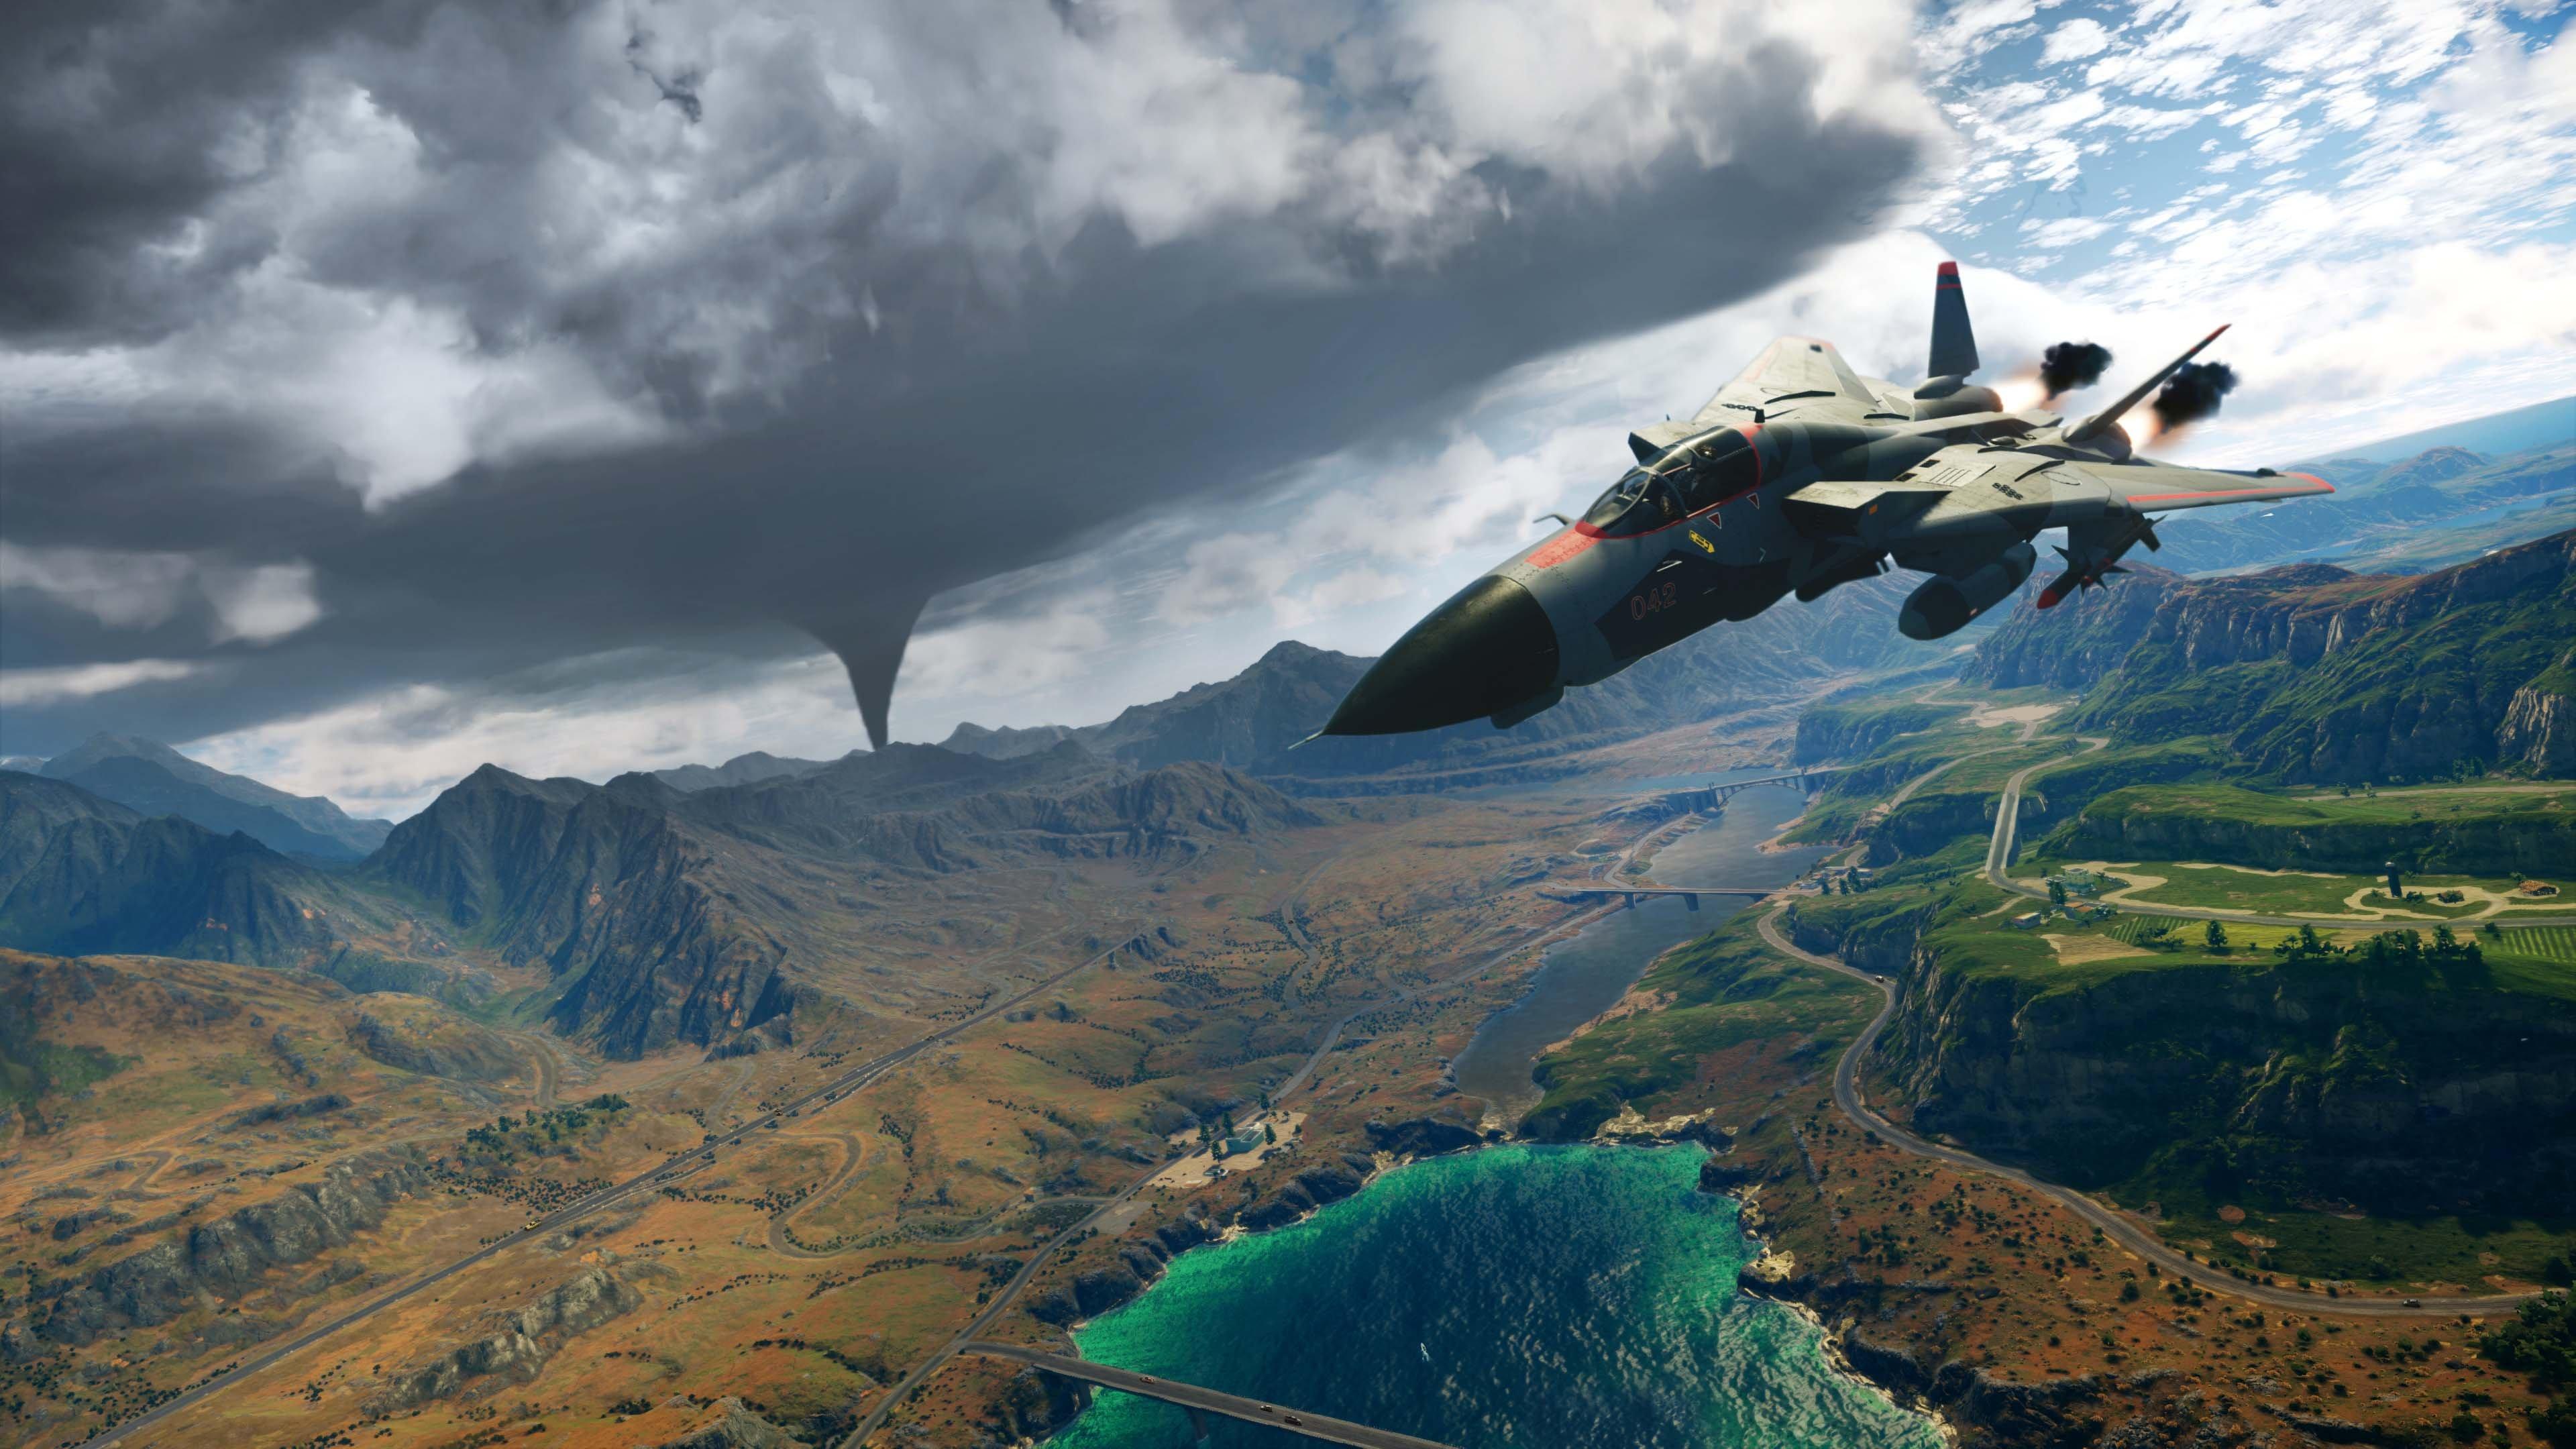 just cause 4 ps4 gamestop